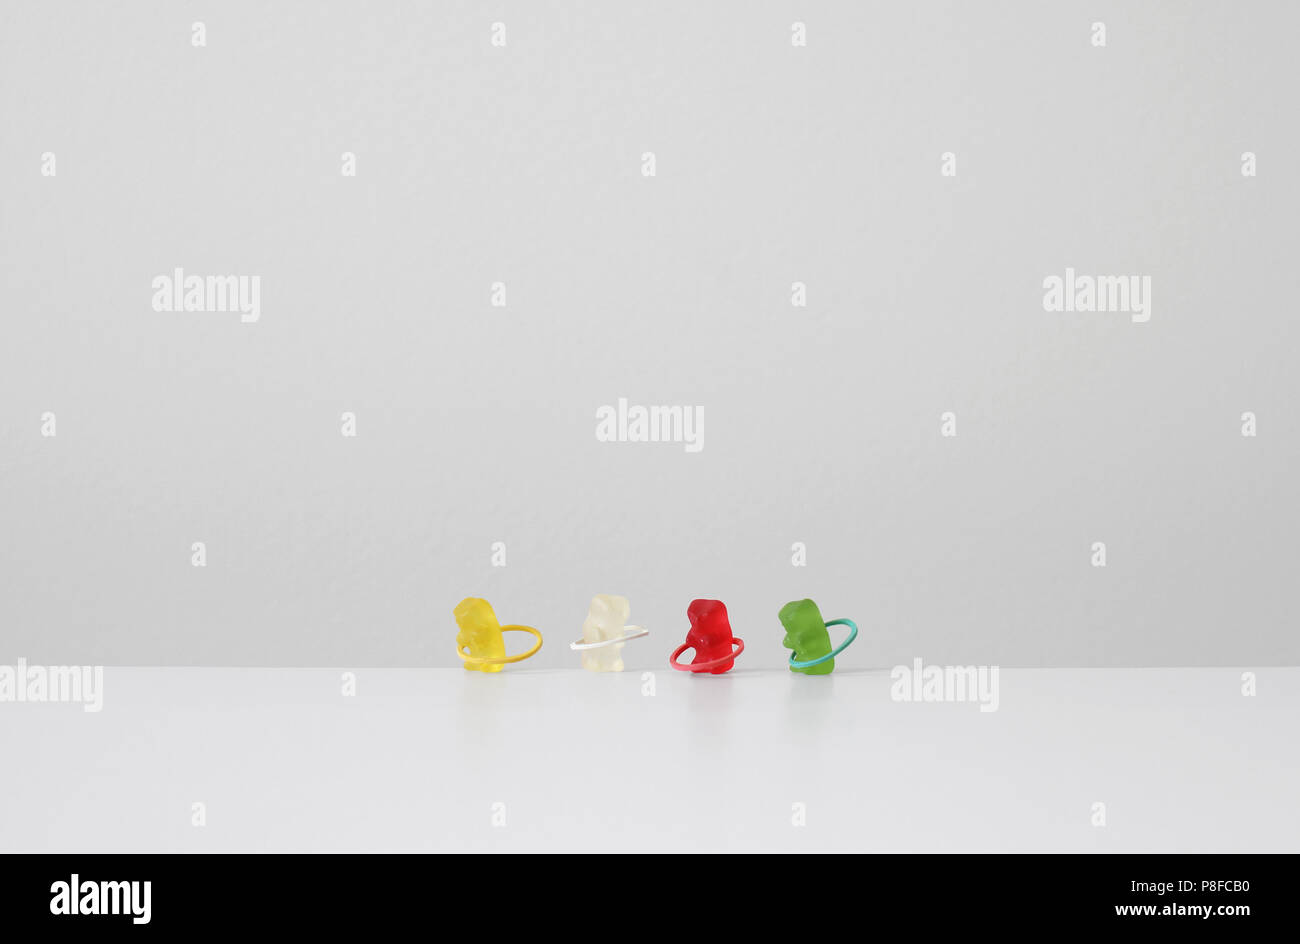 Gummy bears exercising with plastic hoops Stock Photo